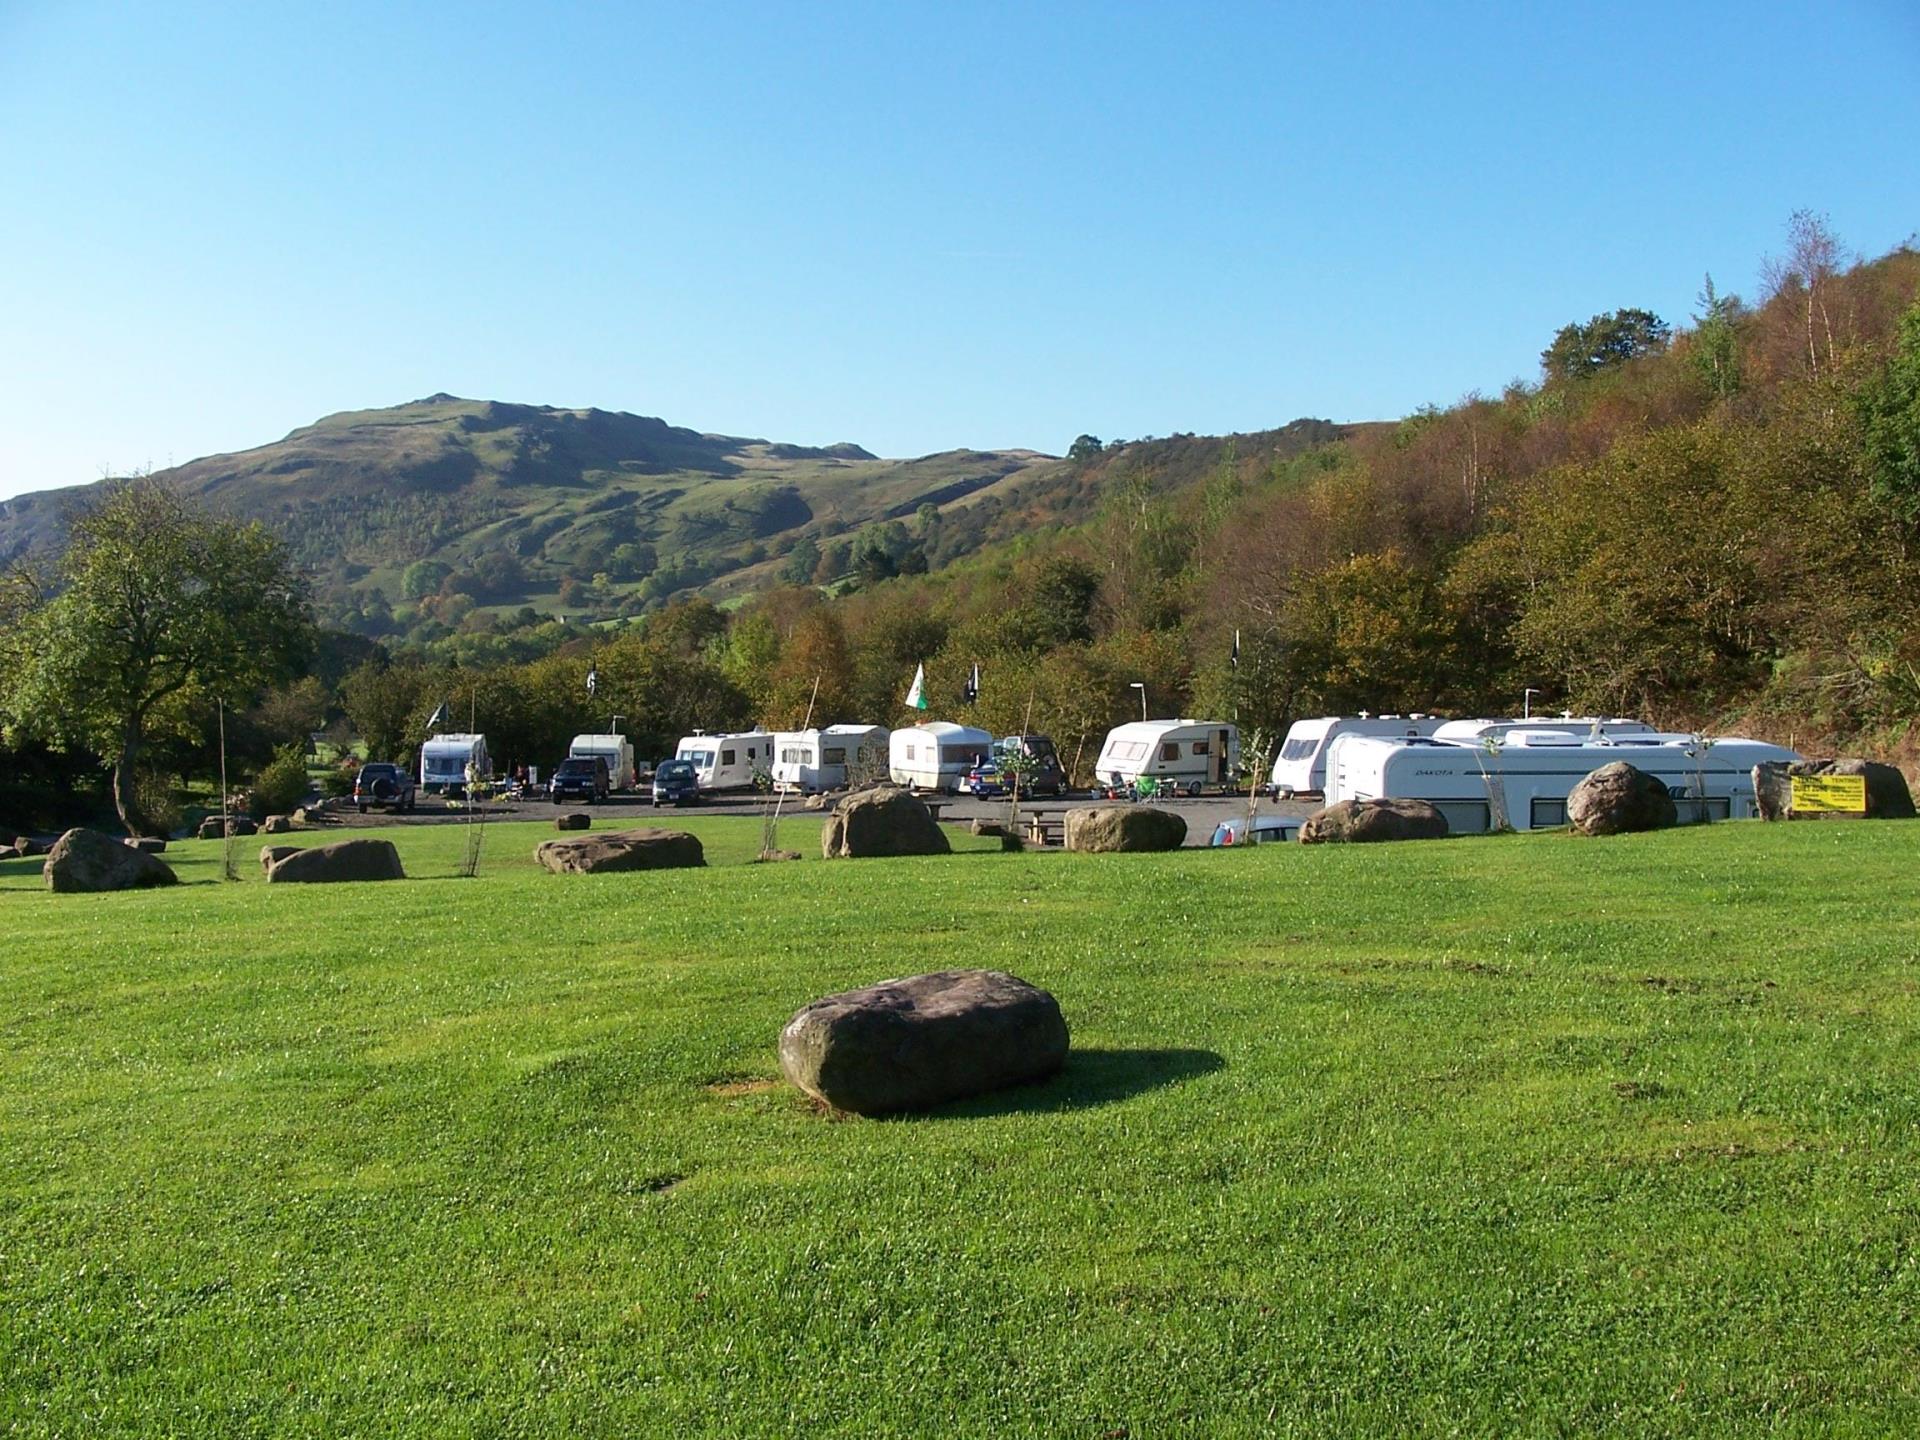 Some Caravan pitches